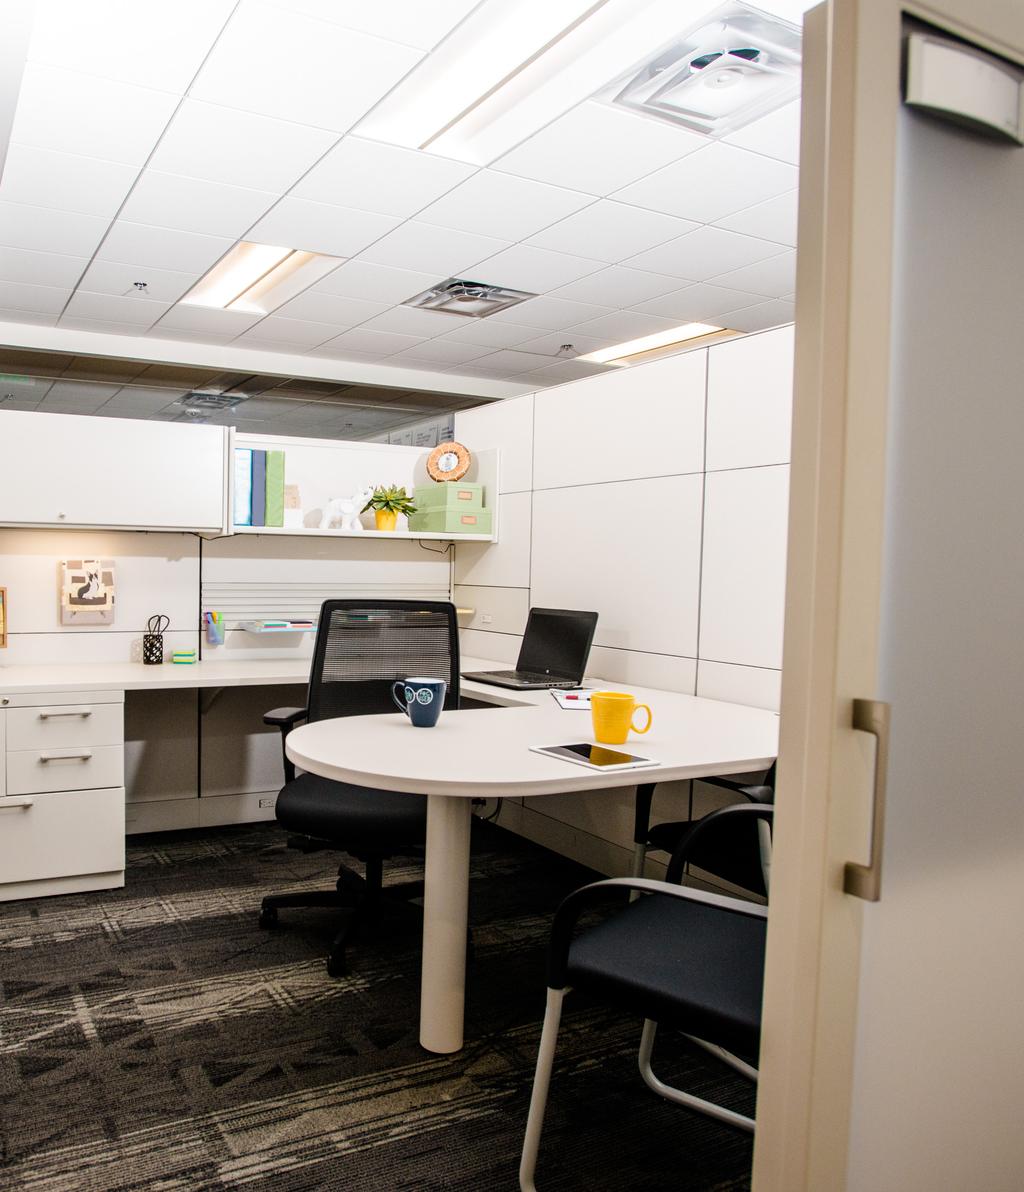 Capture was configured to deliver plenty of privacy within the open office setting.